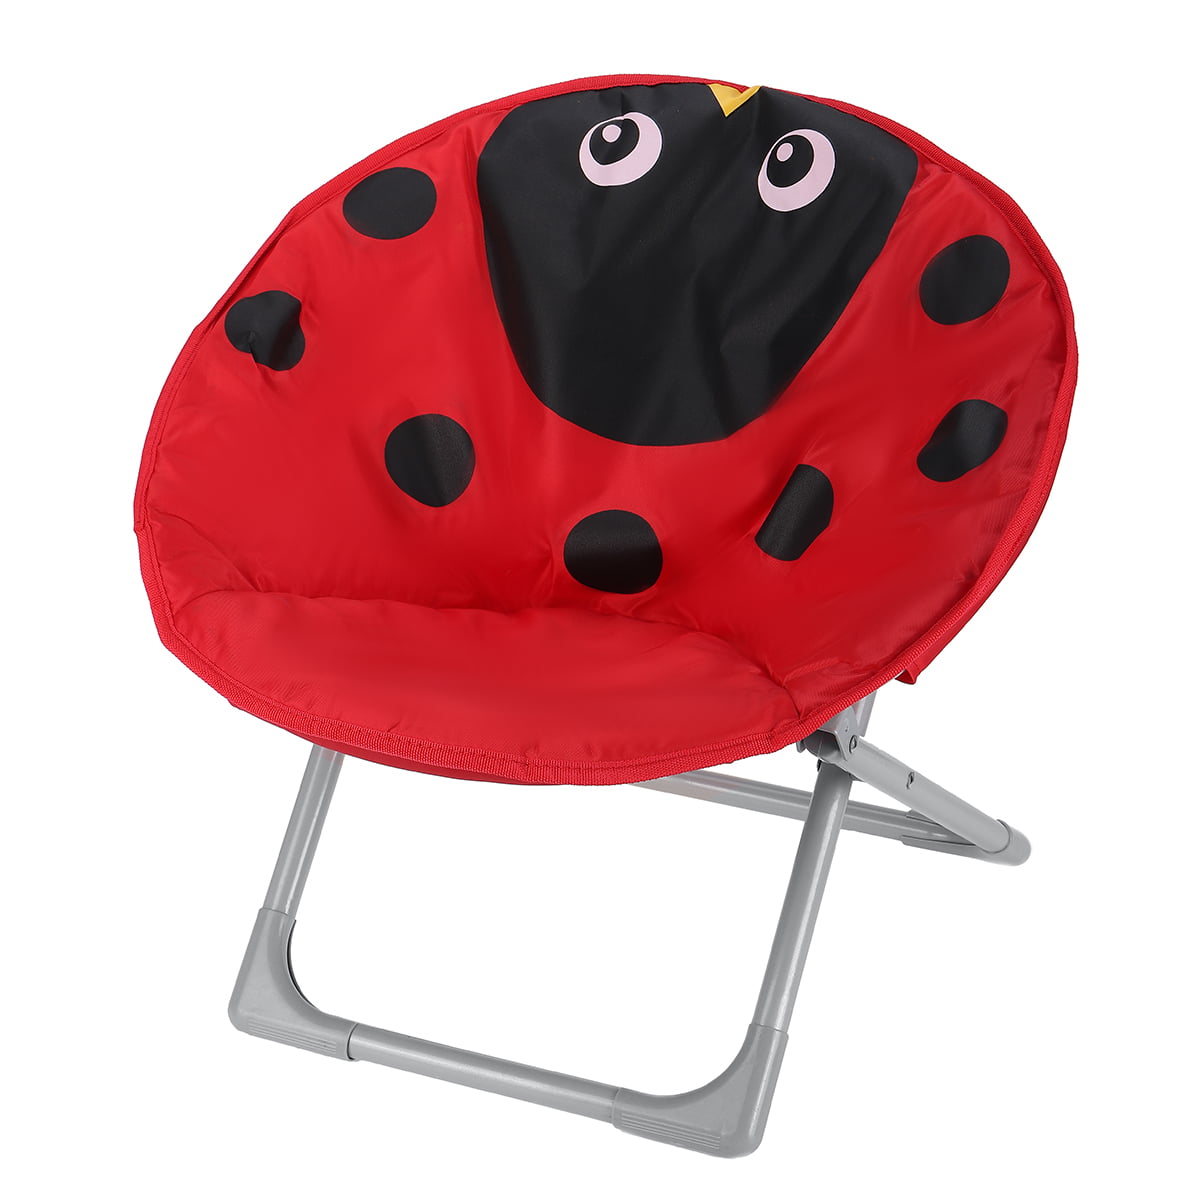 Kids Saucer Chair with Metal Frame, Kids Soft Wide Oversized Lounging